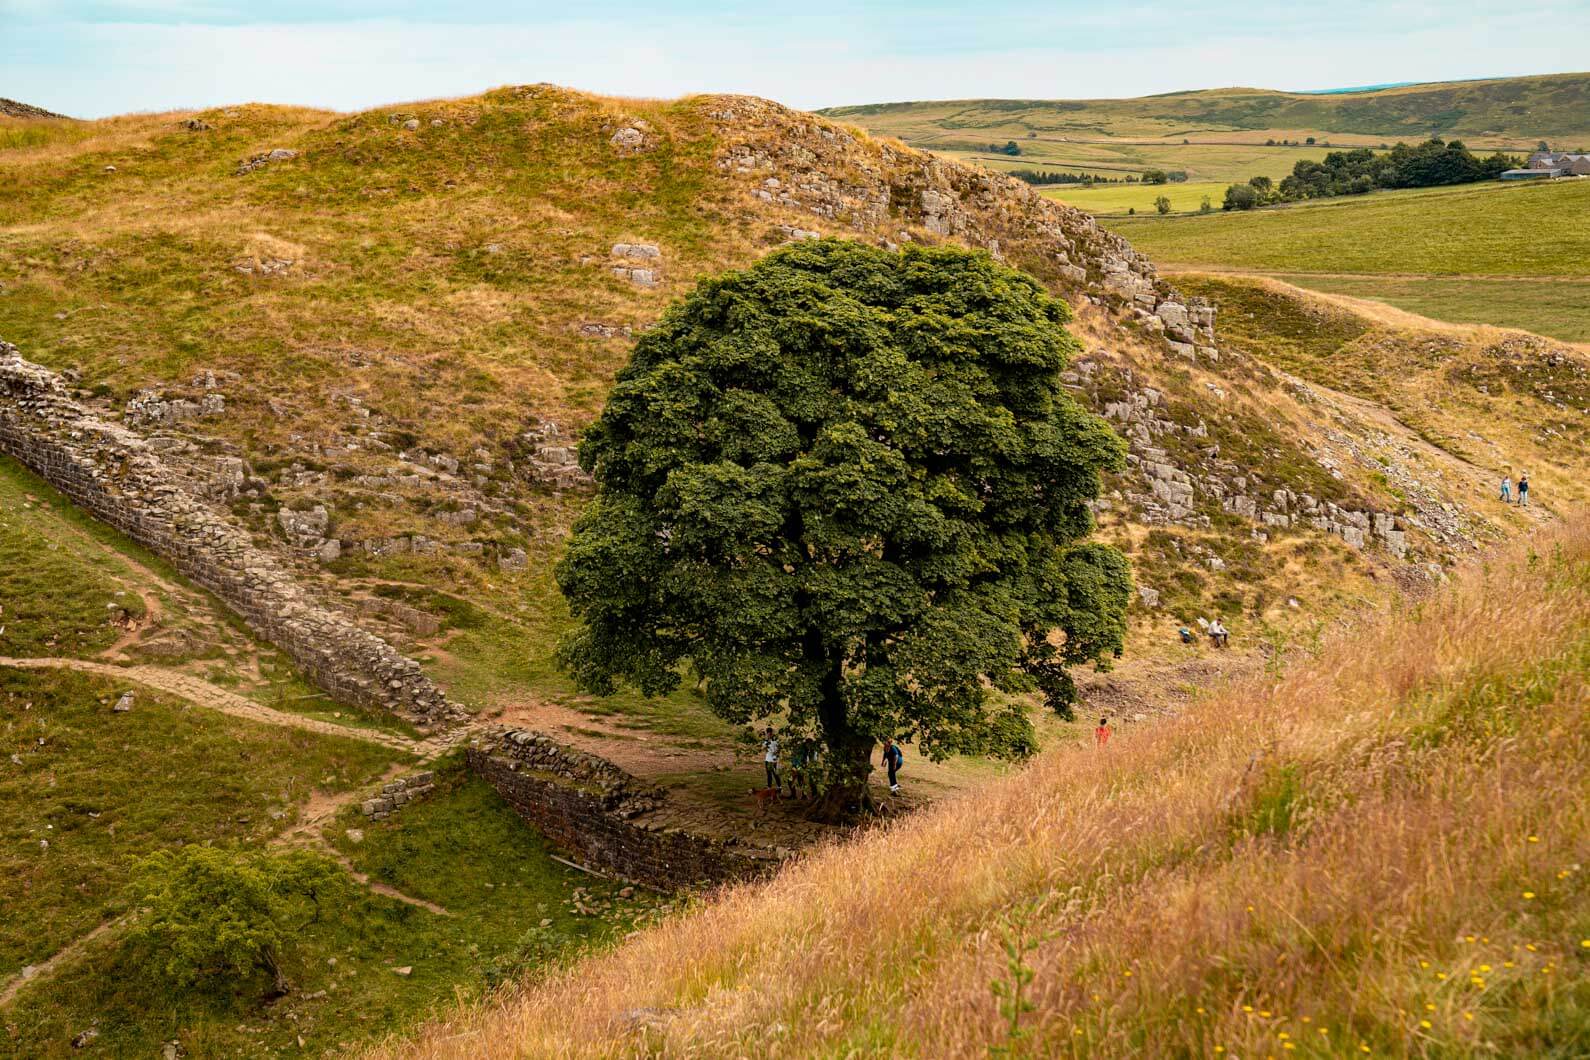 A complete guide to Northumberland National Park, England